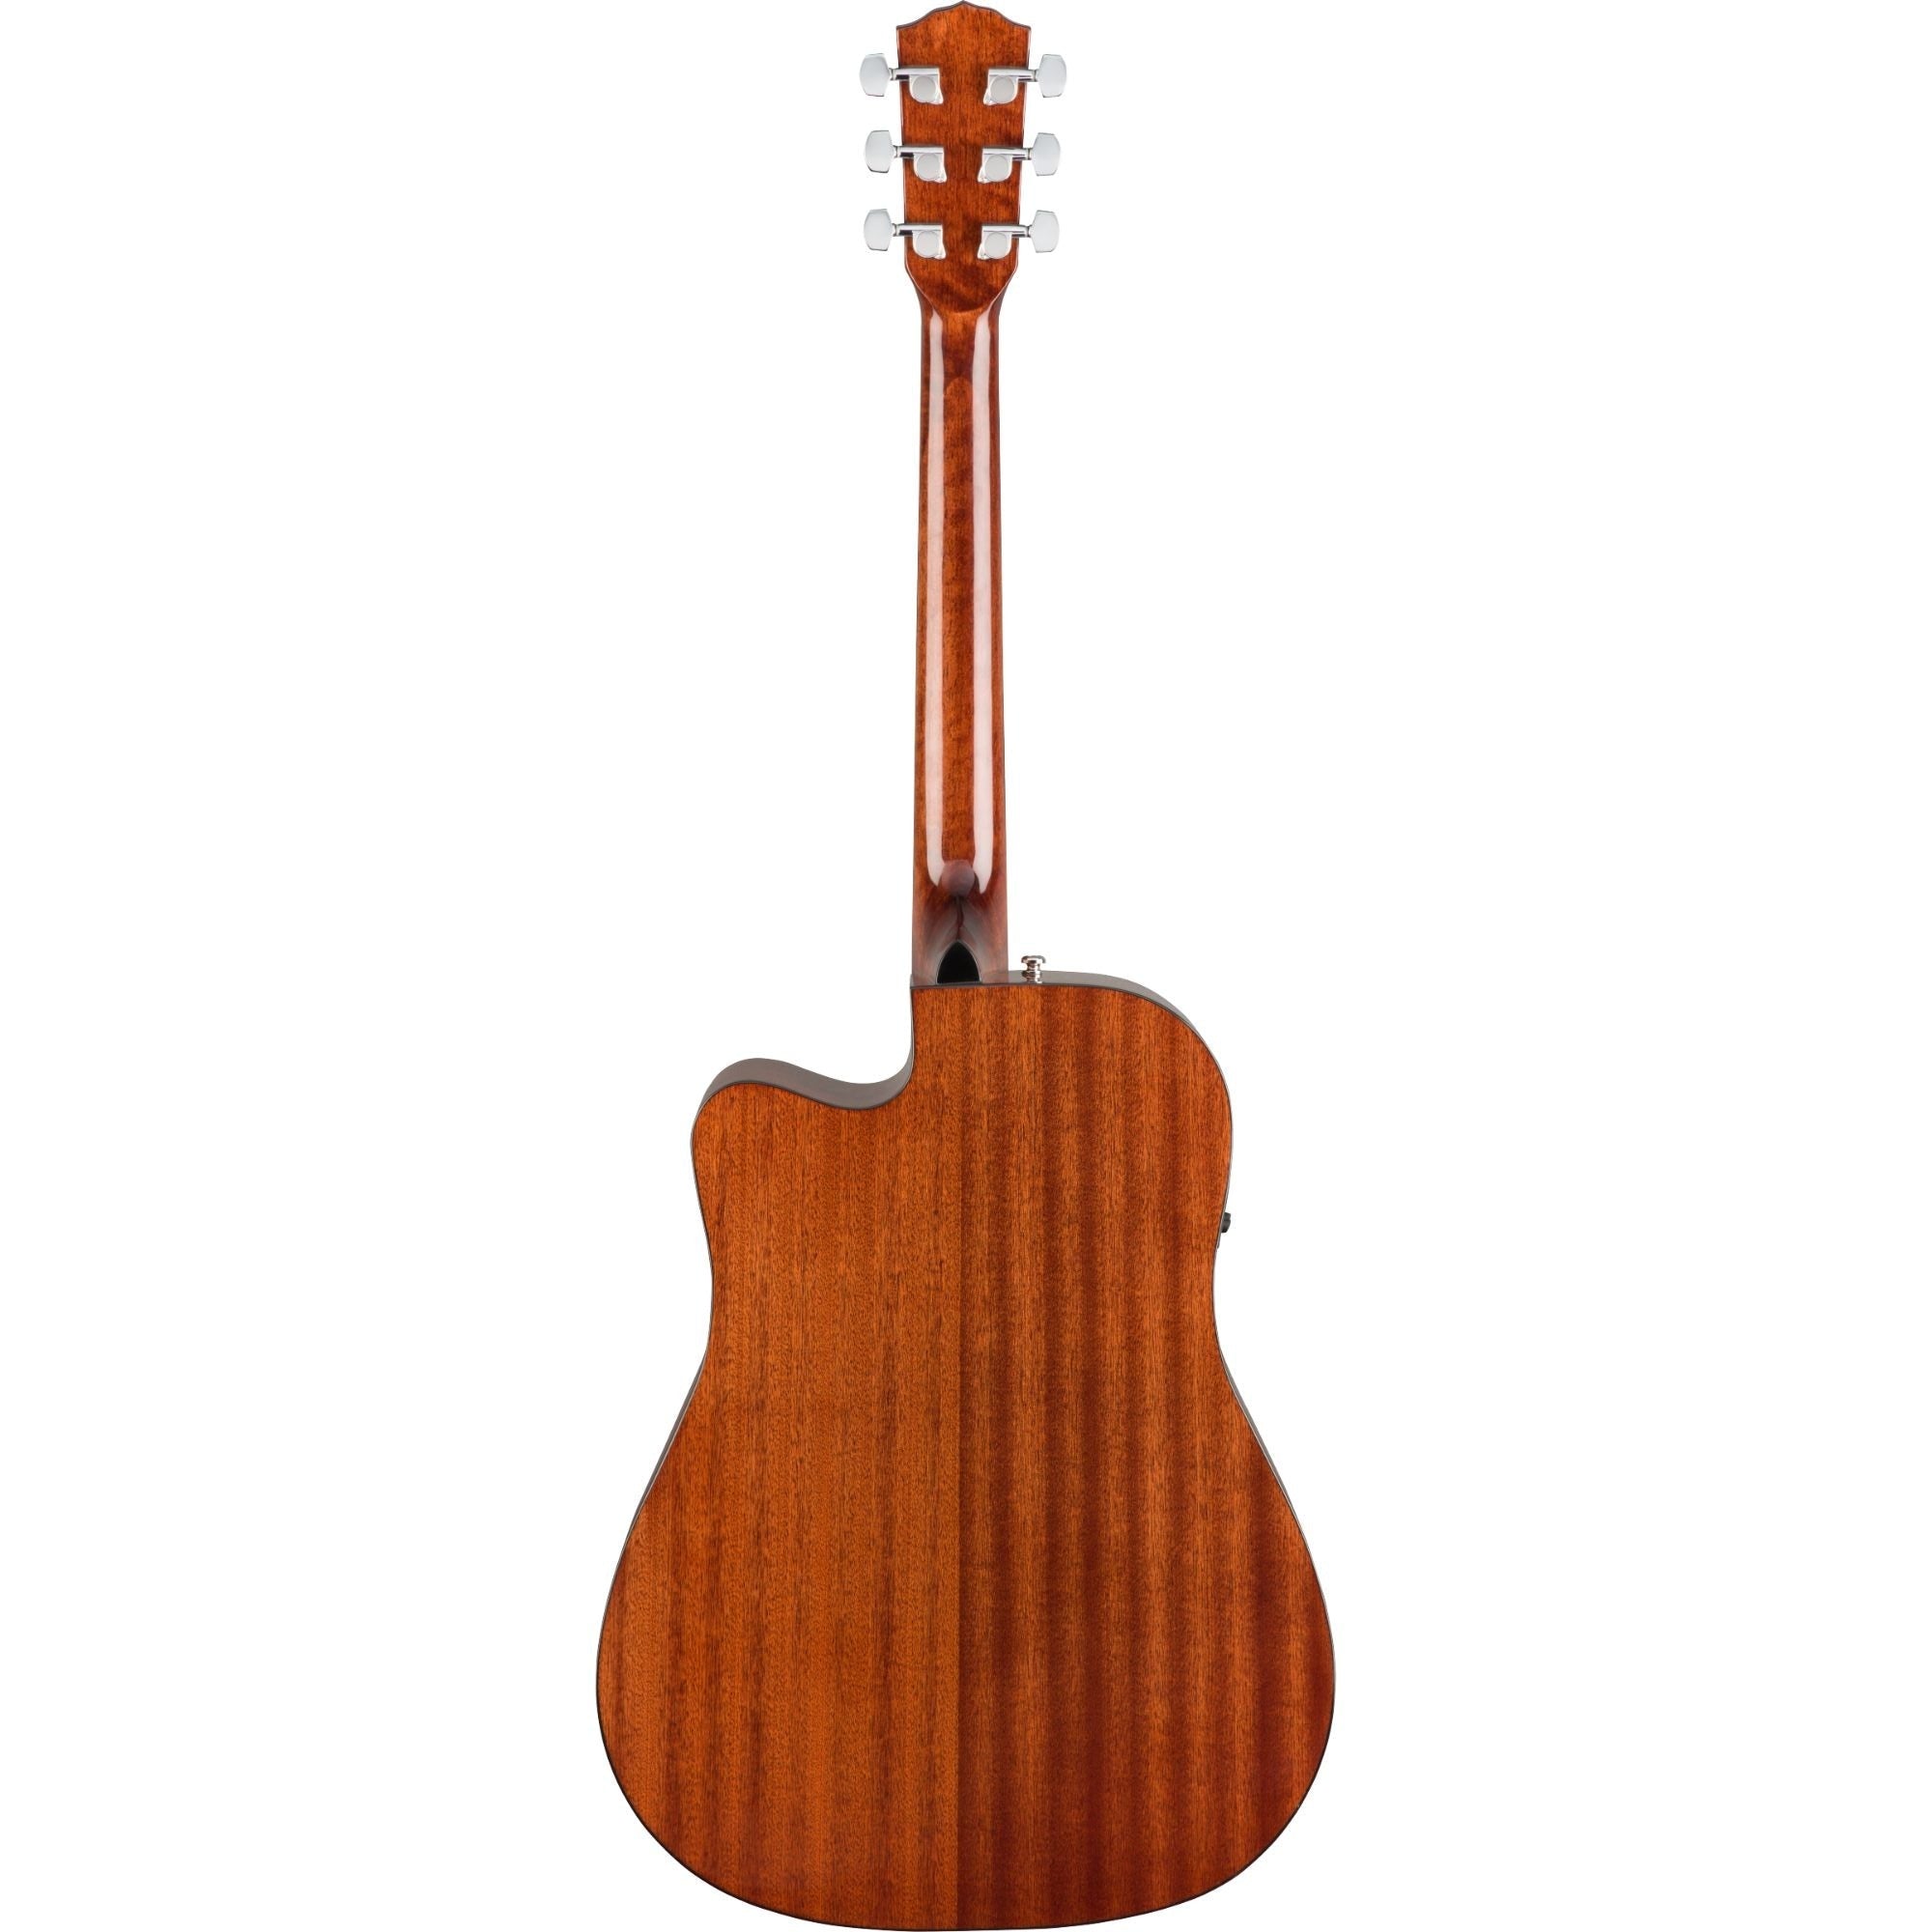 Fender CD-60SCE Acoustic-Electric Guitar, All-Mahogany